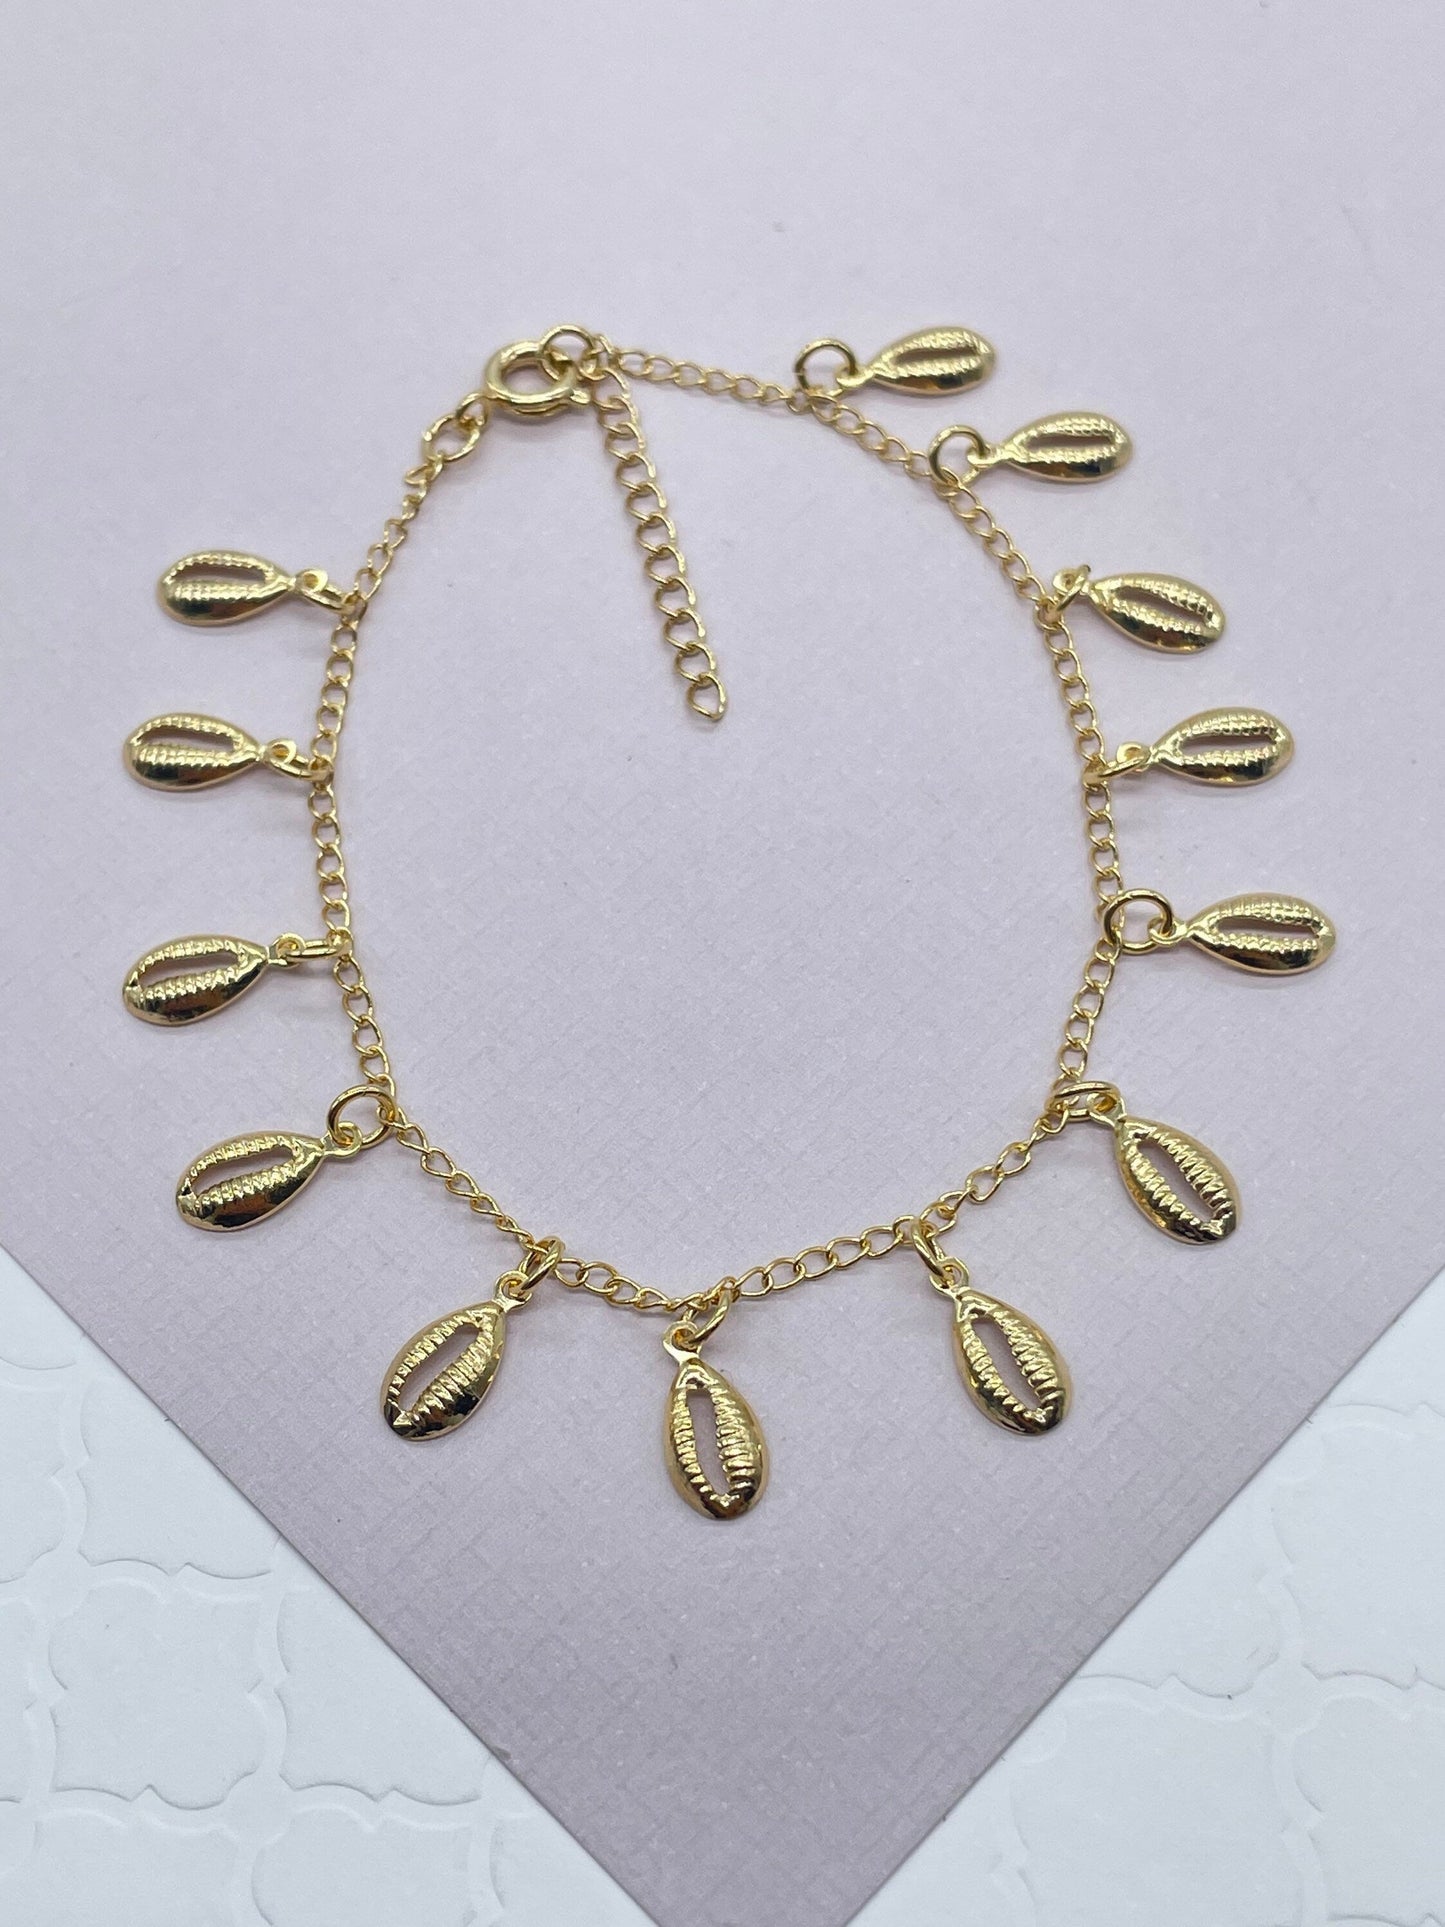 18k Gold Layered Dainty Chain with Eleven Extra Light Cowrie Shell Charms,